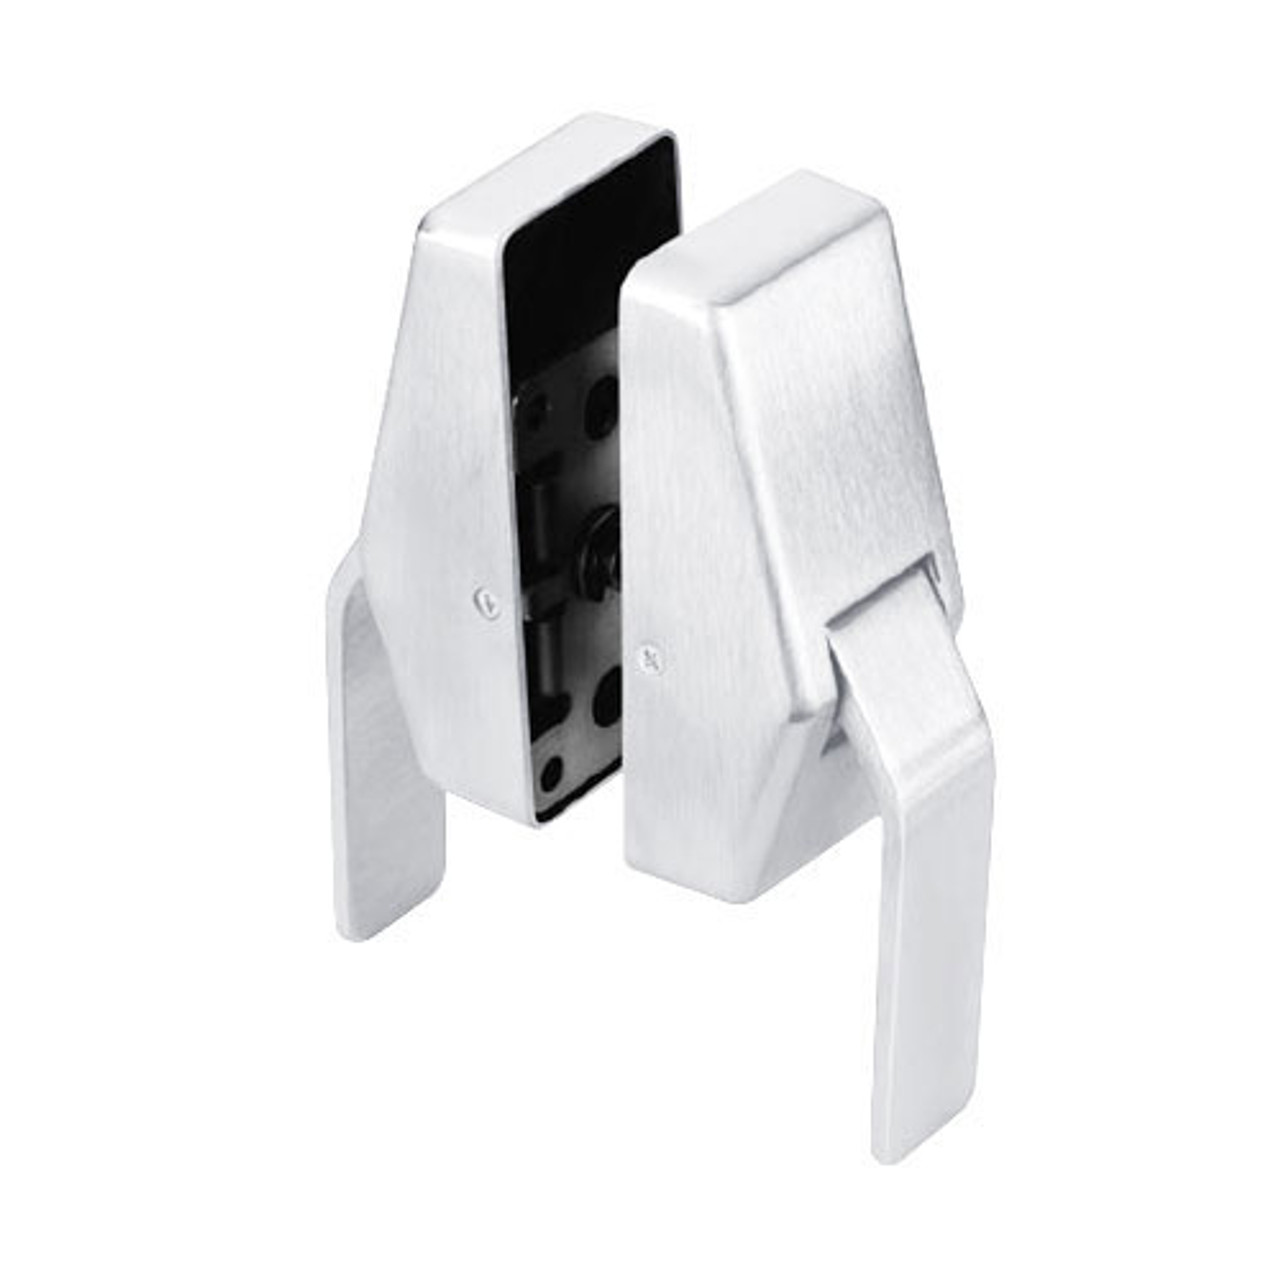 HL6-3-625-L Glynn Johnson HL6 Series Standard Function Push and Pull latch with Lead Lining in Polished Chrome Finish